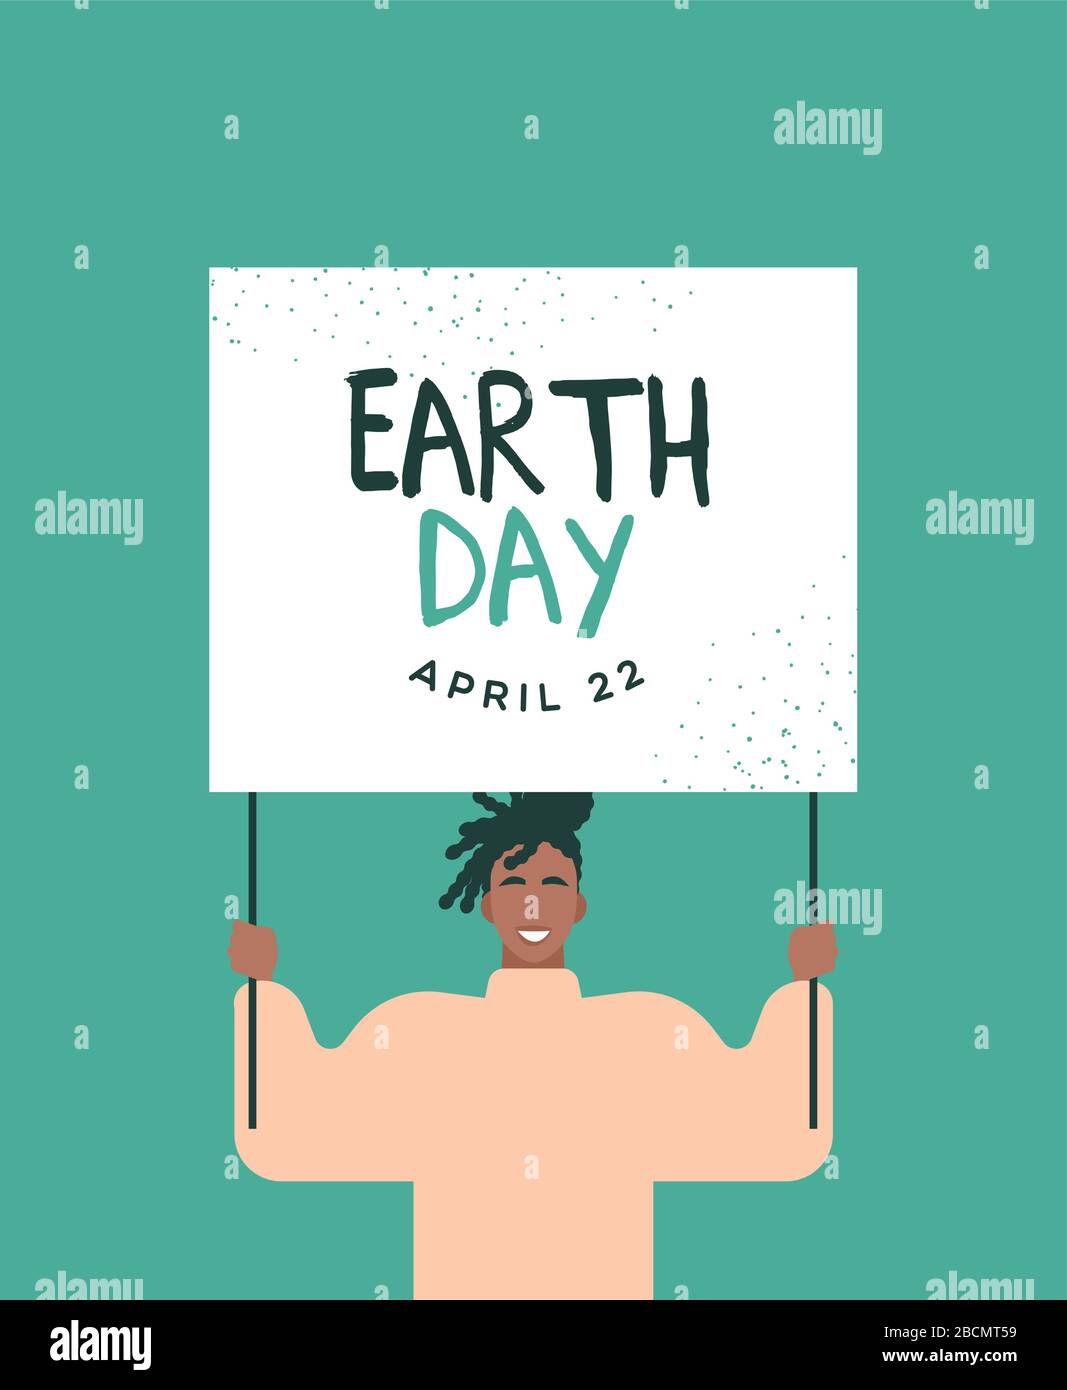 Earth Day greeting card for april 22 eco friendly holiday event. Young man holding protest sign, environment parade or nature campaign concept. Stock Vector